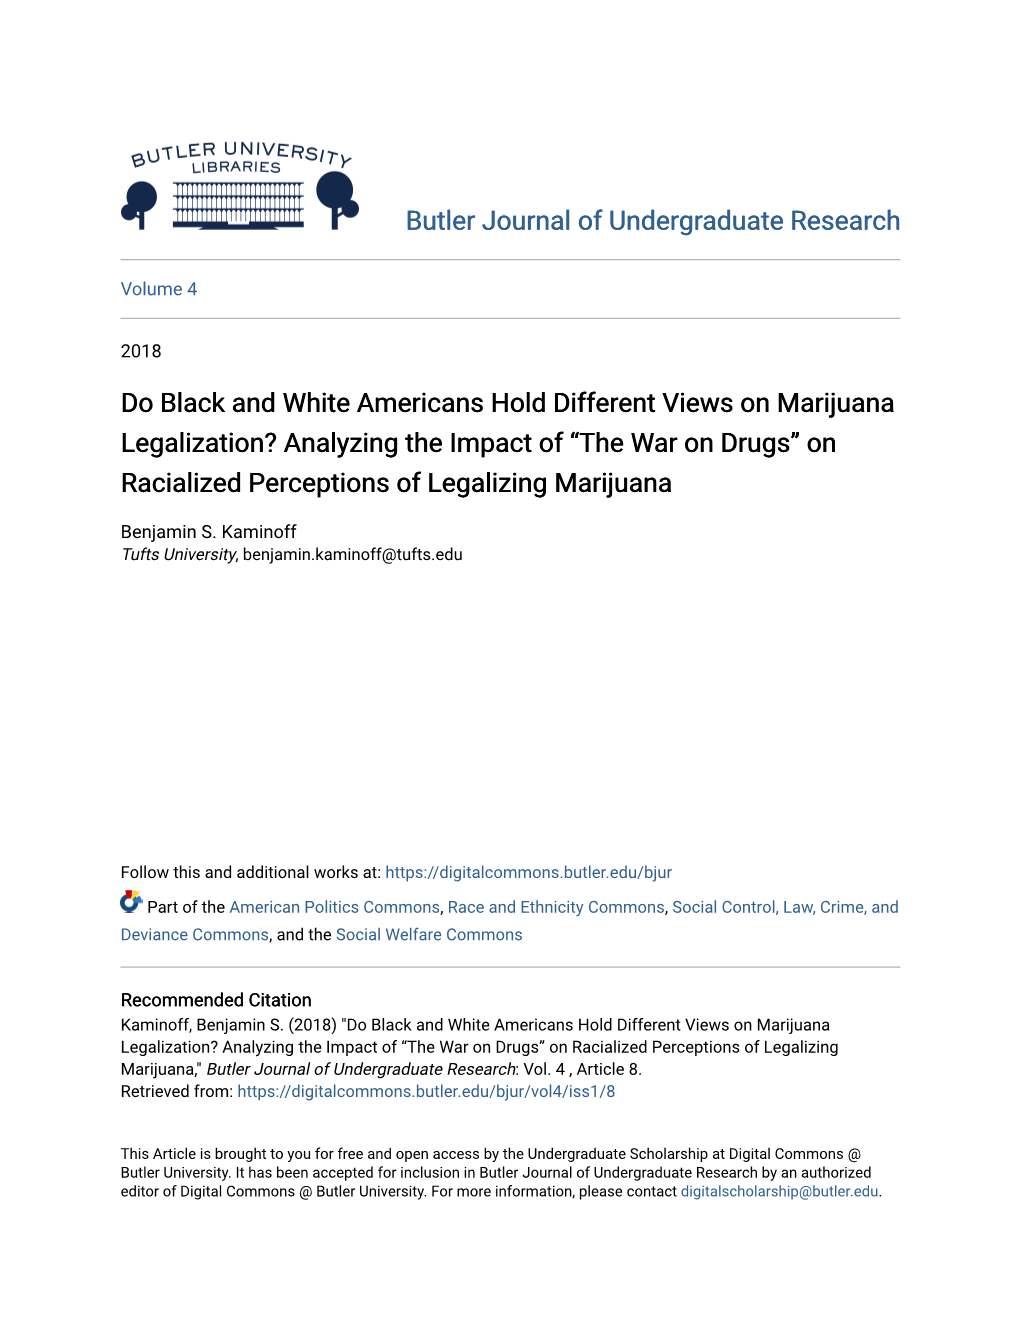 Do Black and White Americans Hold Different Views on Marijuana Legalization? Analyzing the Impact of “The War on Drugs” on R